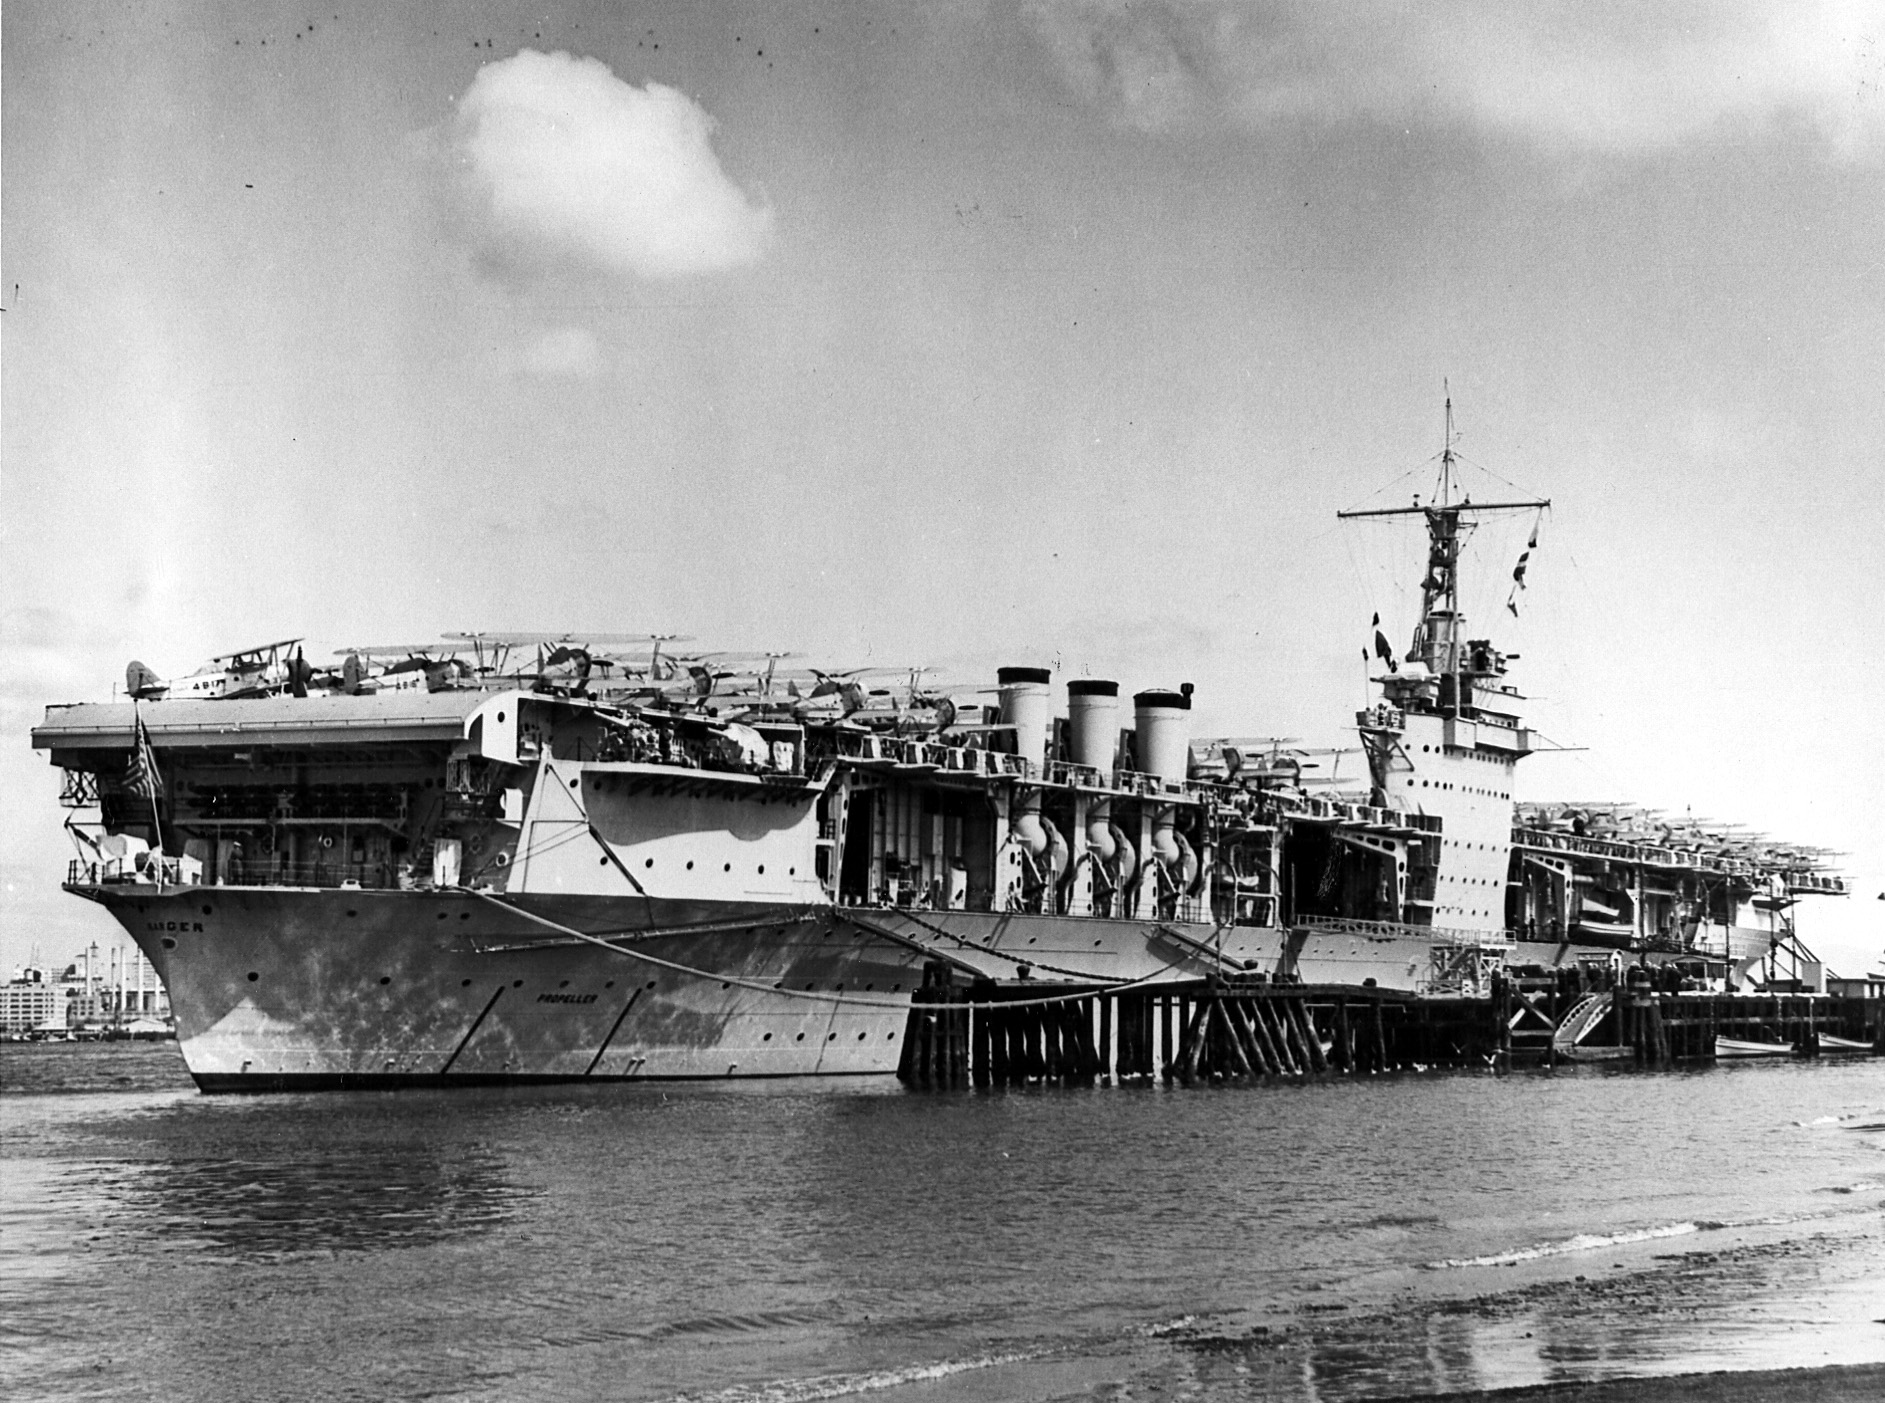 The USS Ranger (CV-4) is moored at North Island, California with aircraft on her deck. 03/14/1938. Naval Aviation Museum Accession Number 1996.488.013.010.